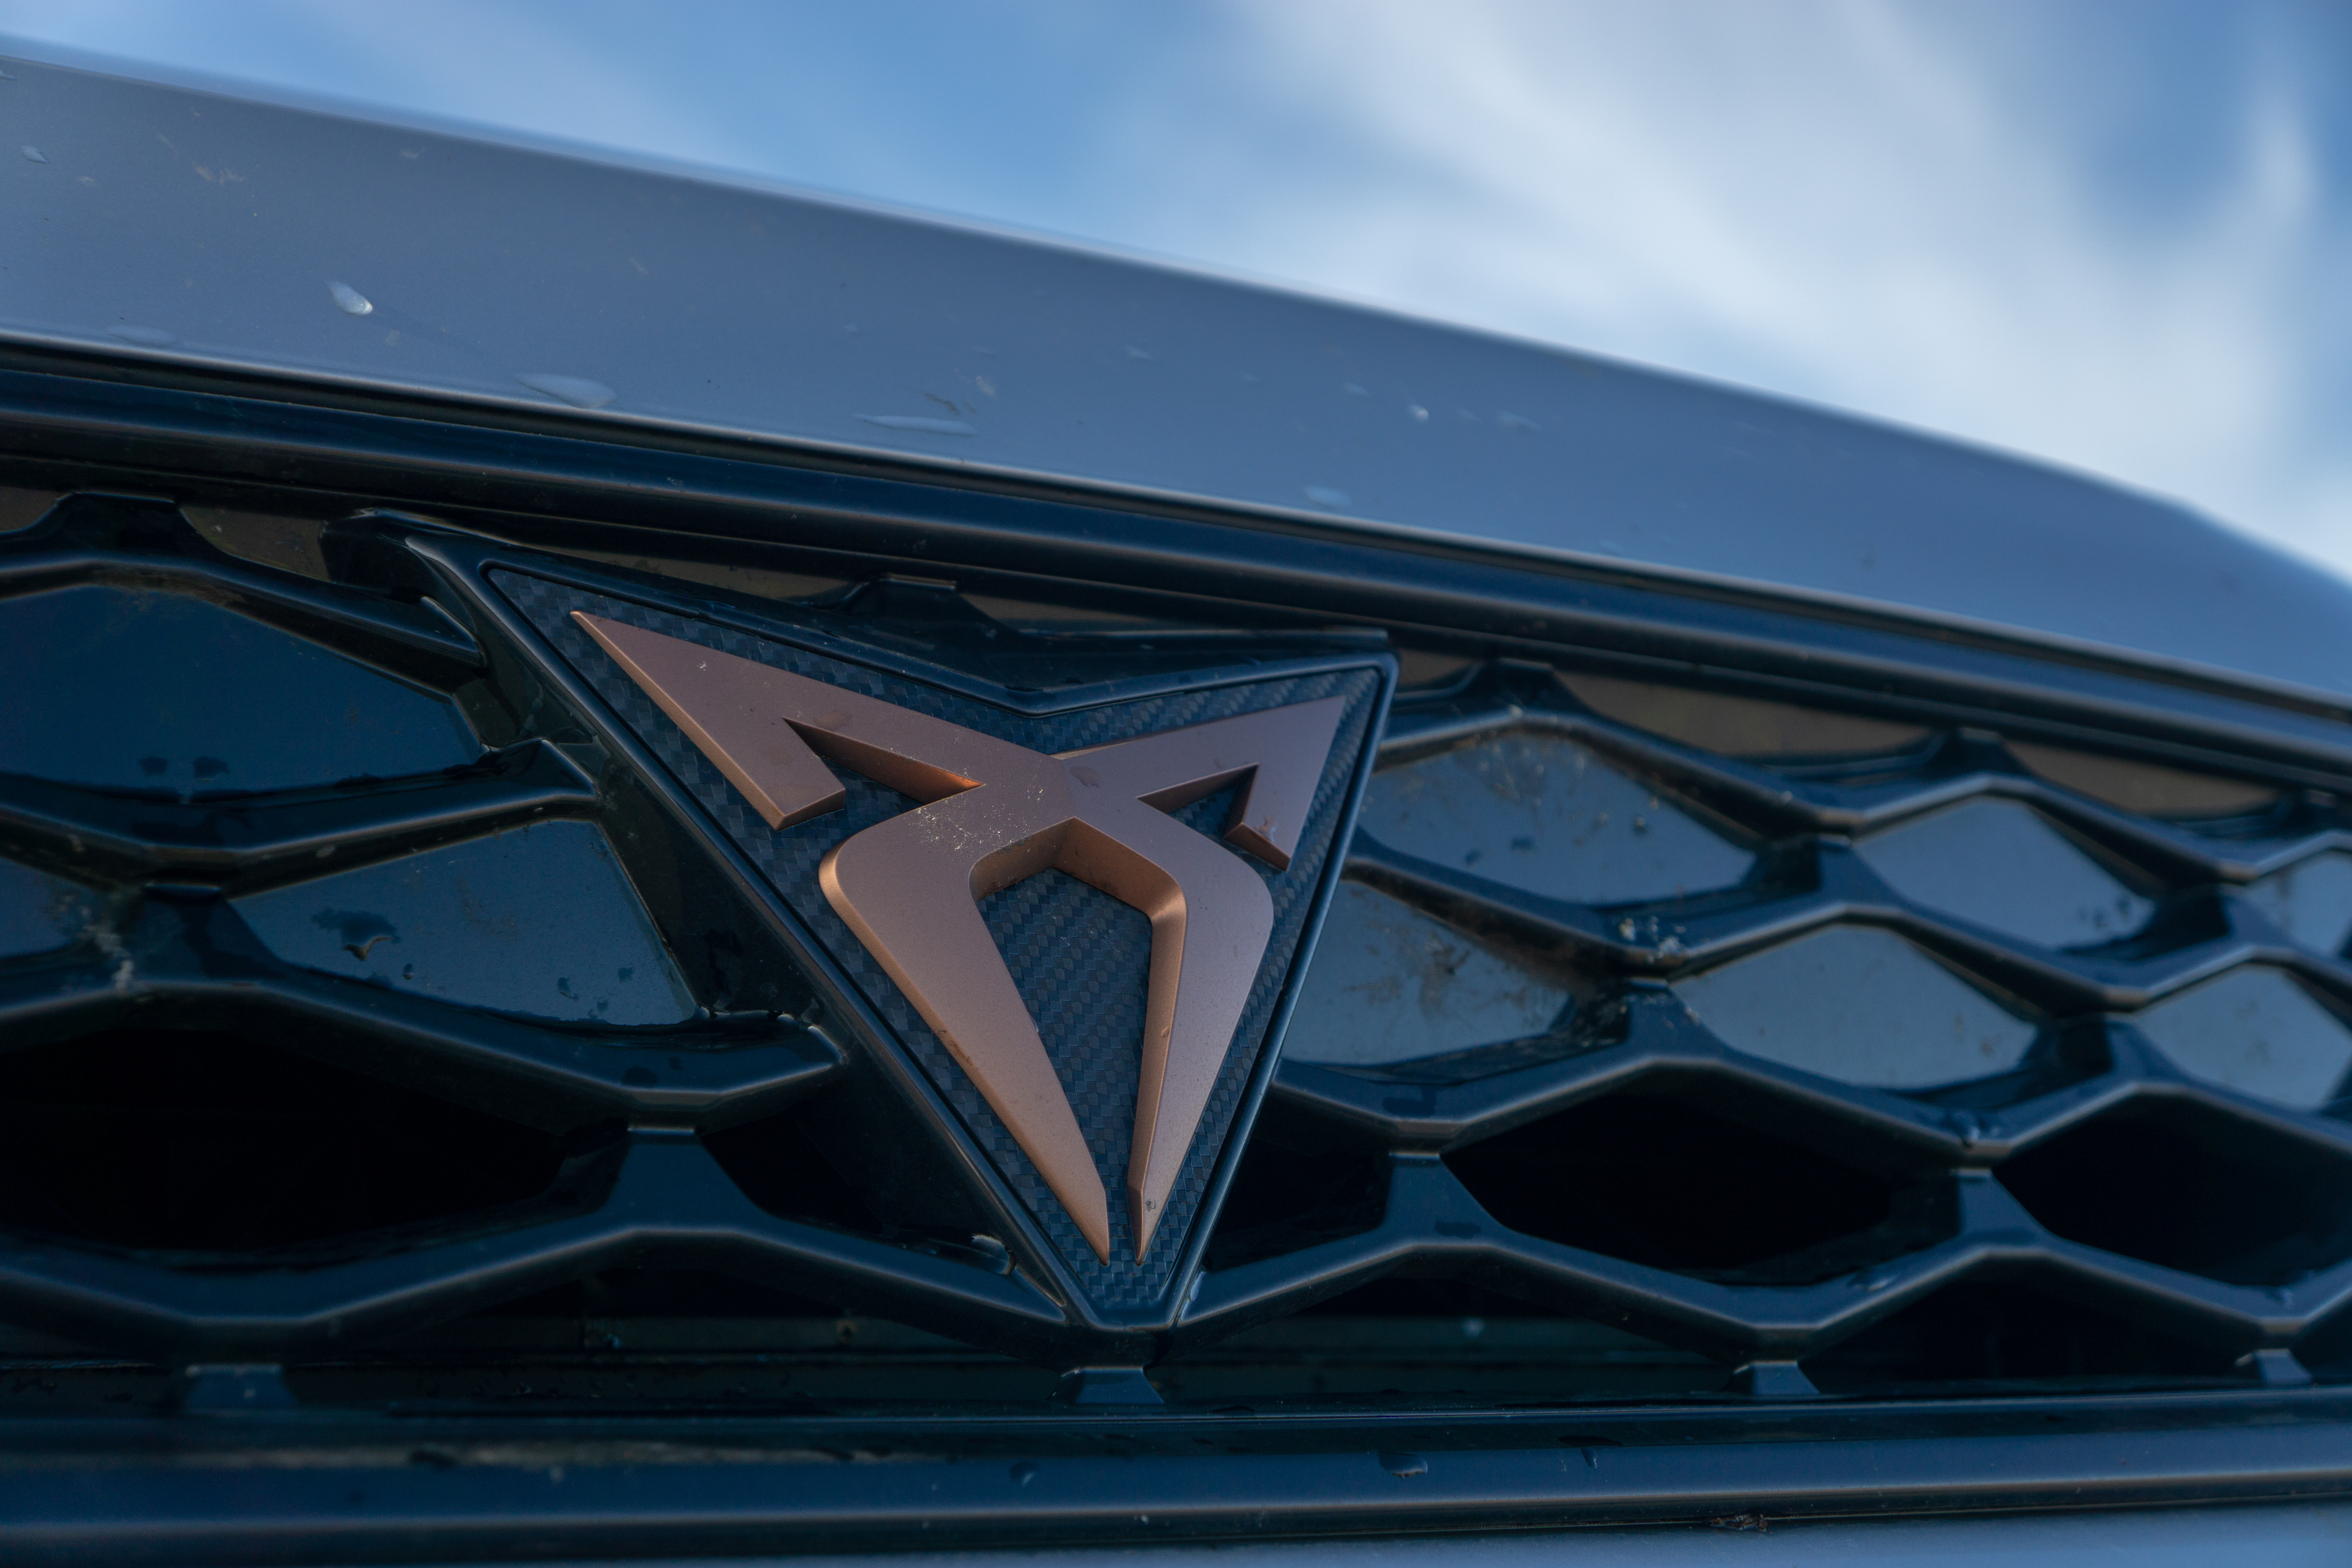 Cupra's own badges adorn the front